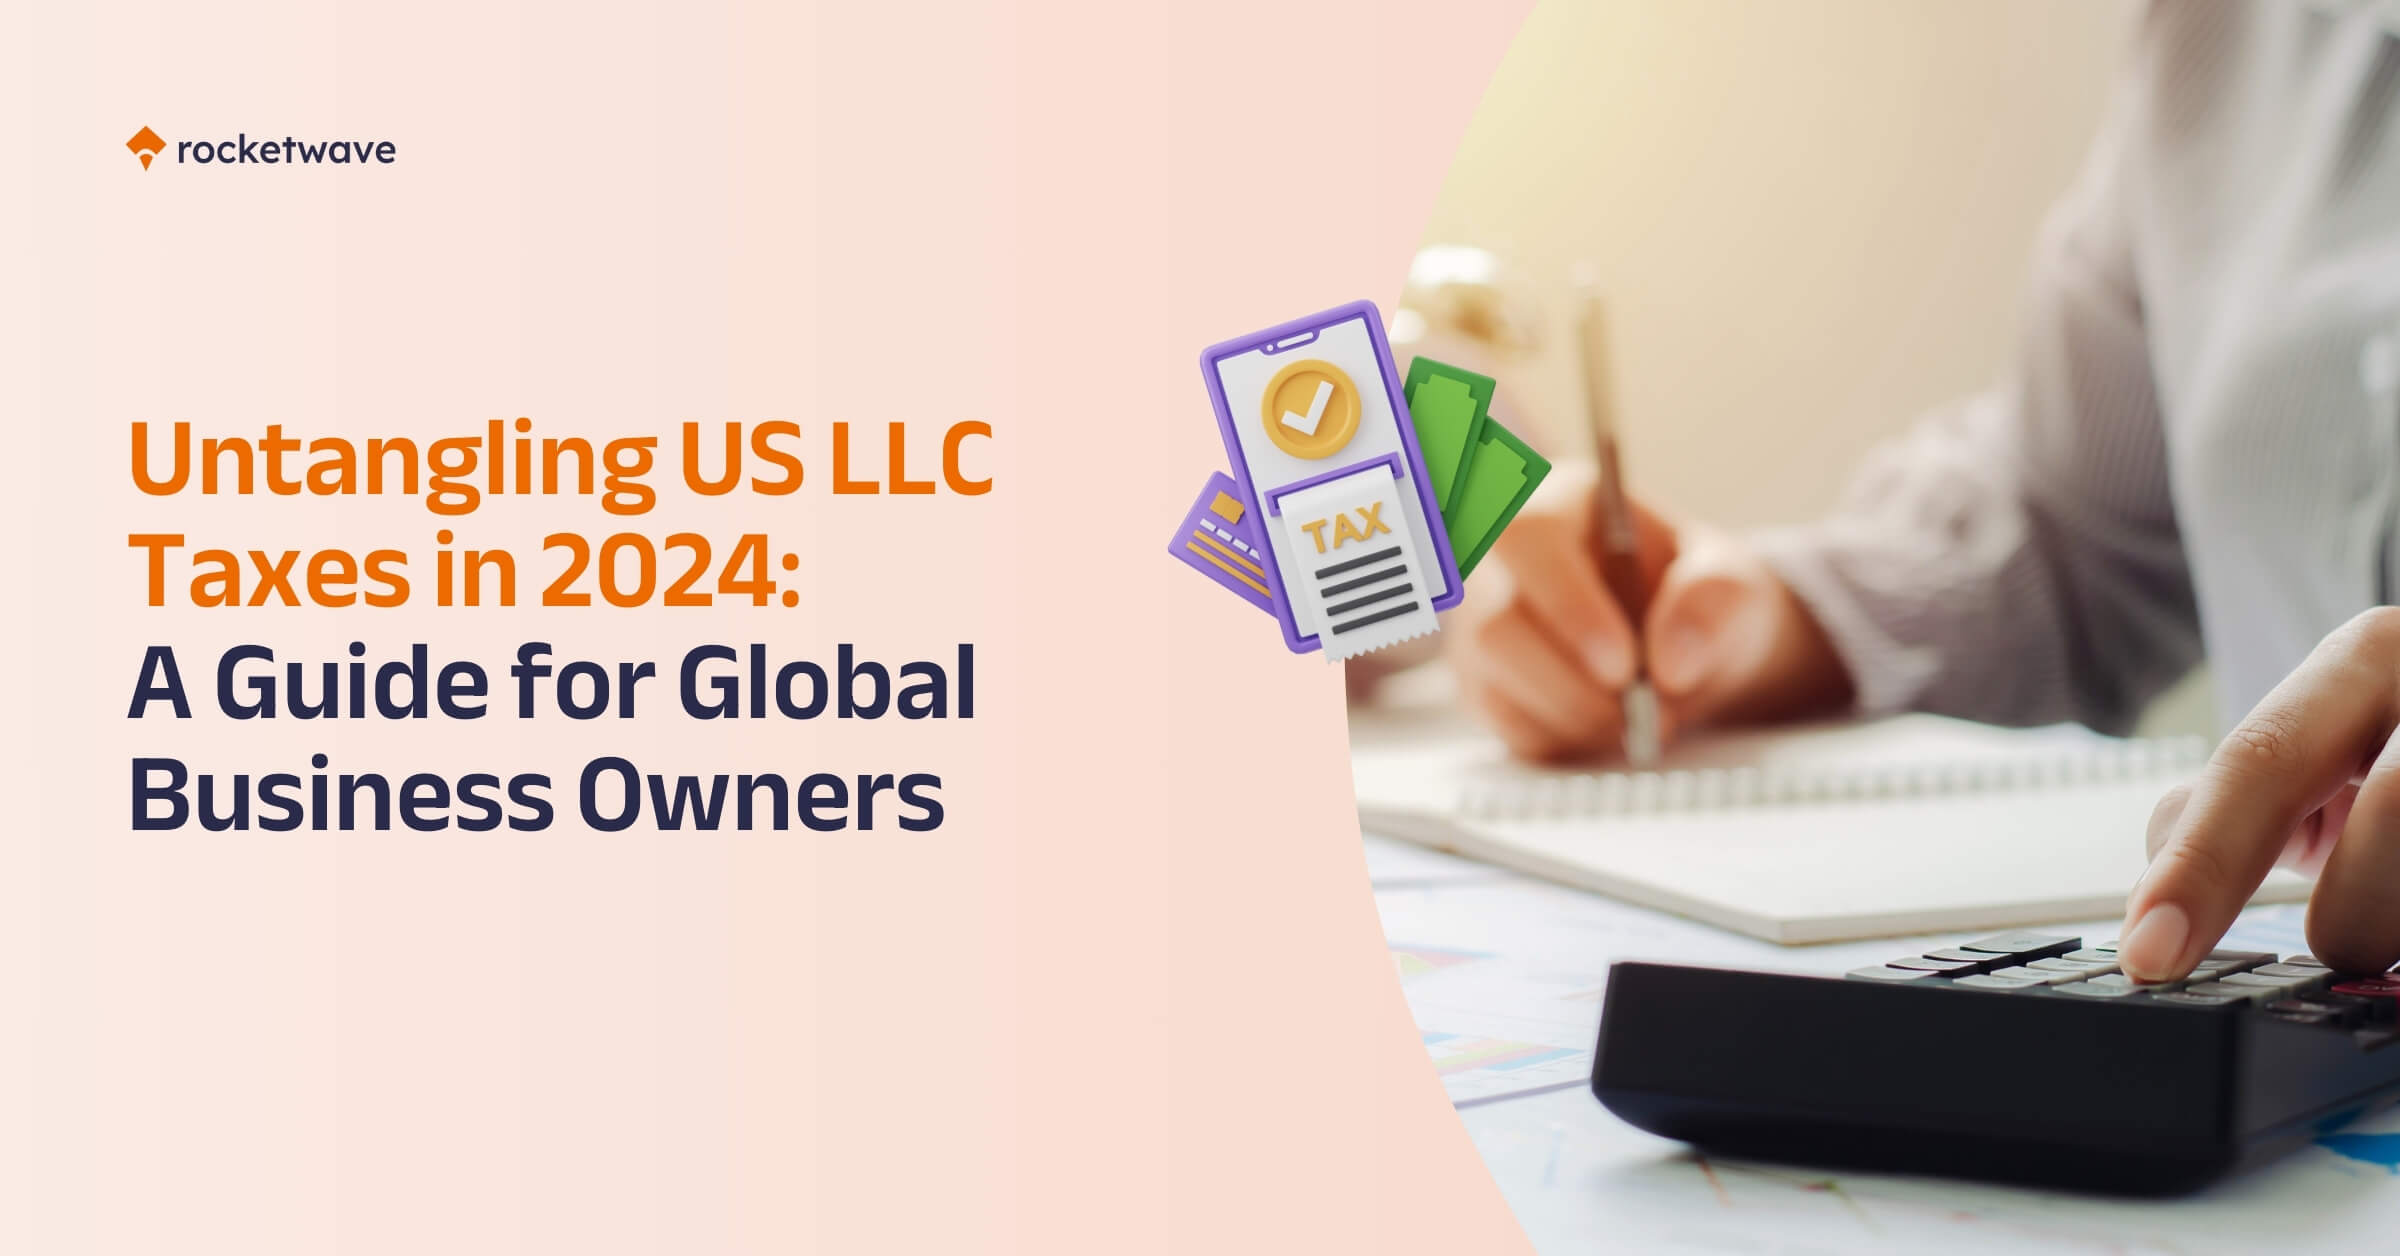 Untangling US LLC Taxes in 2024 A Guide for Global Business Owners